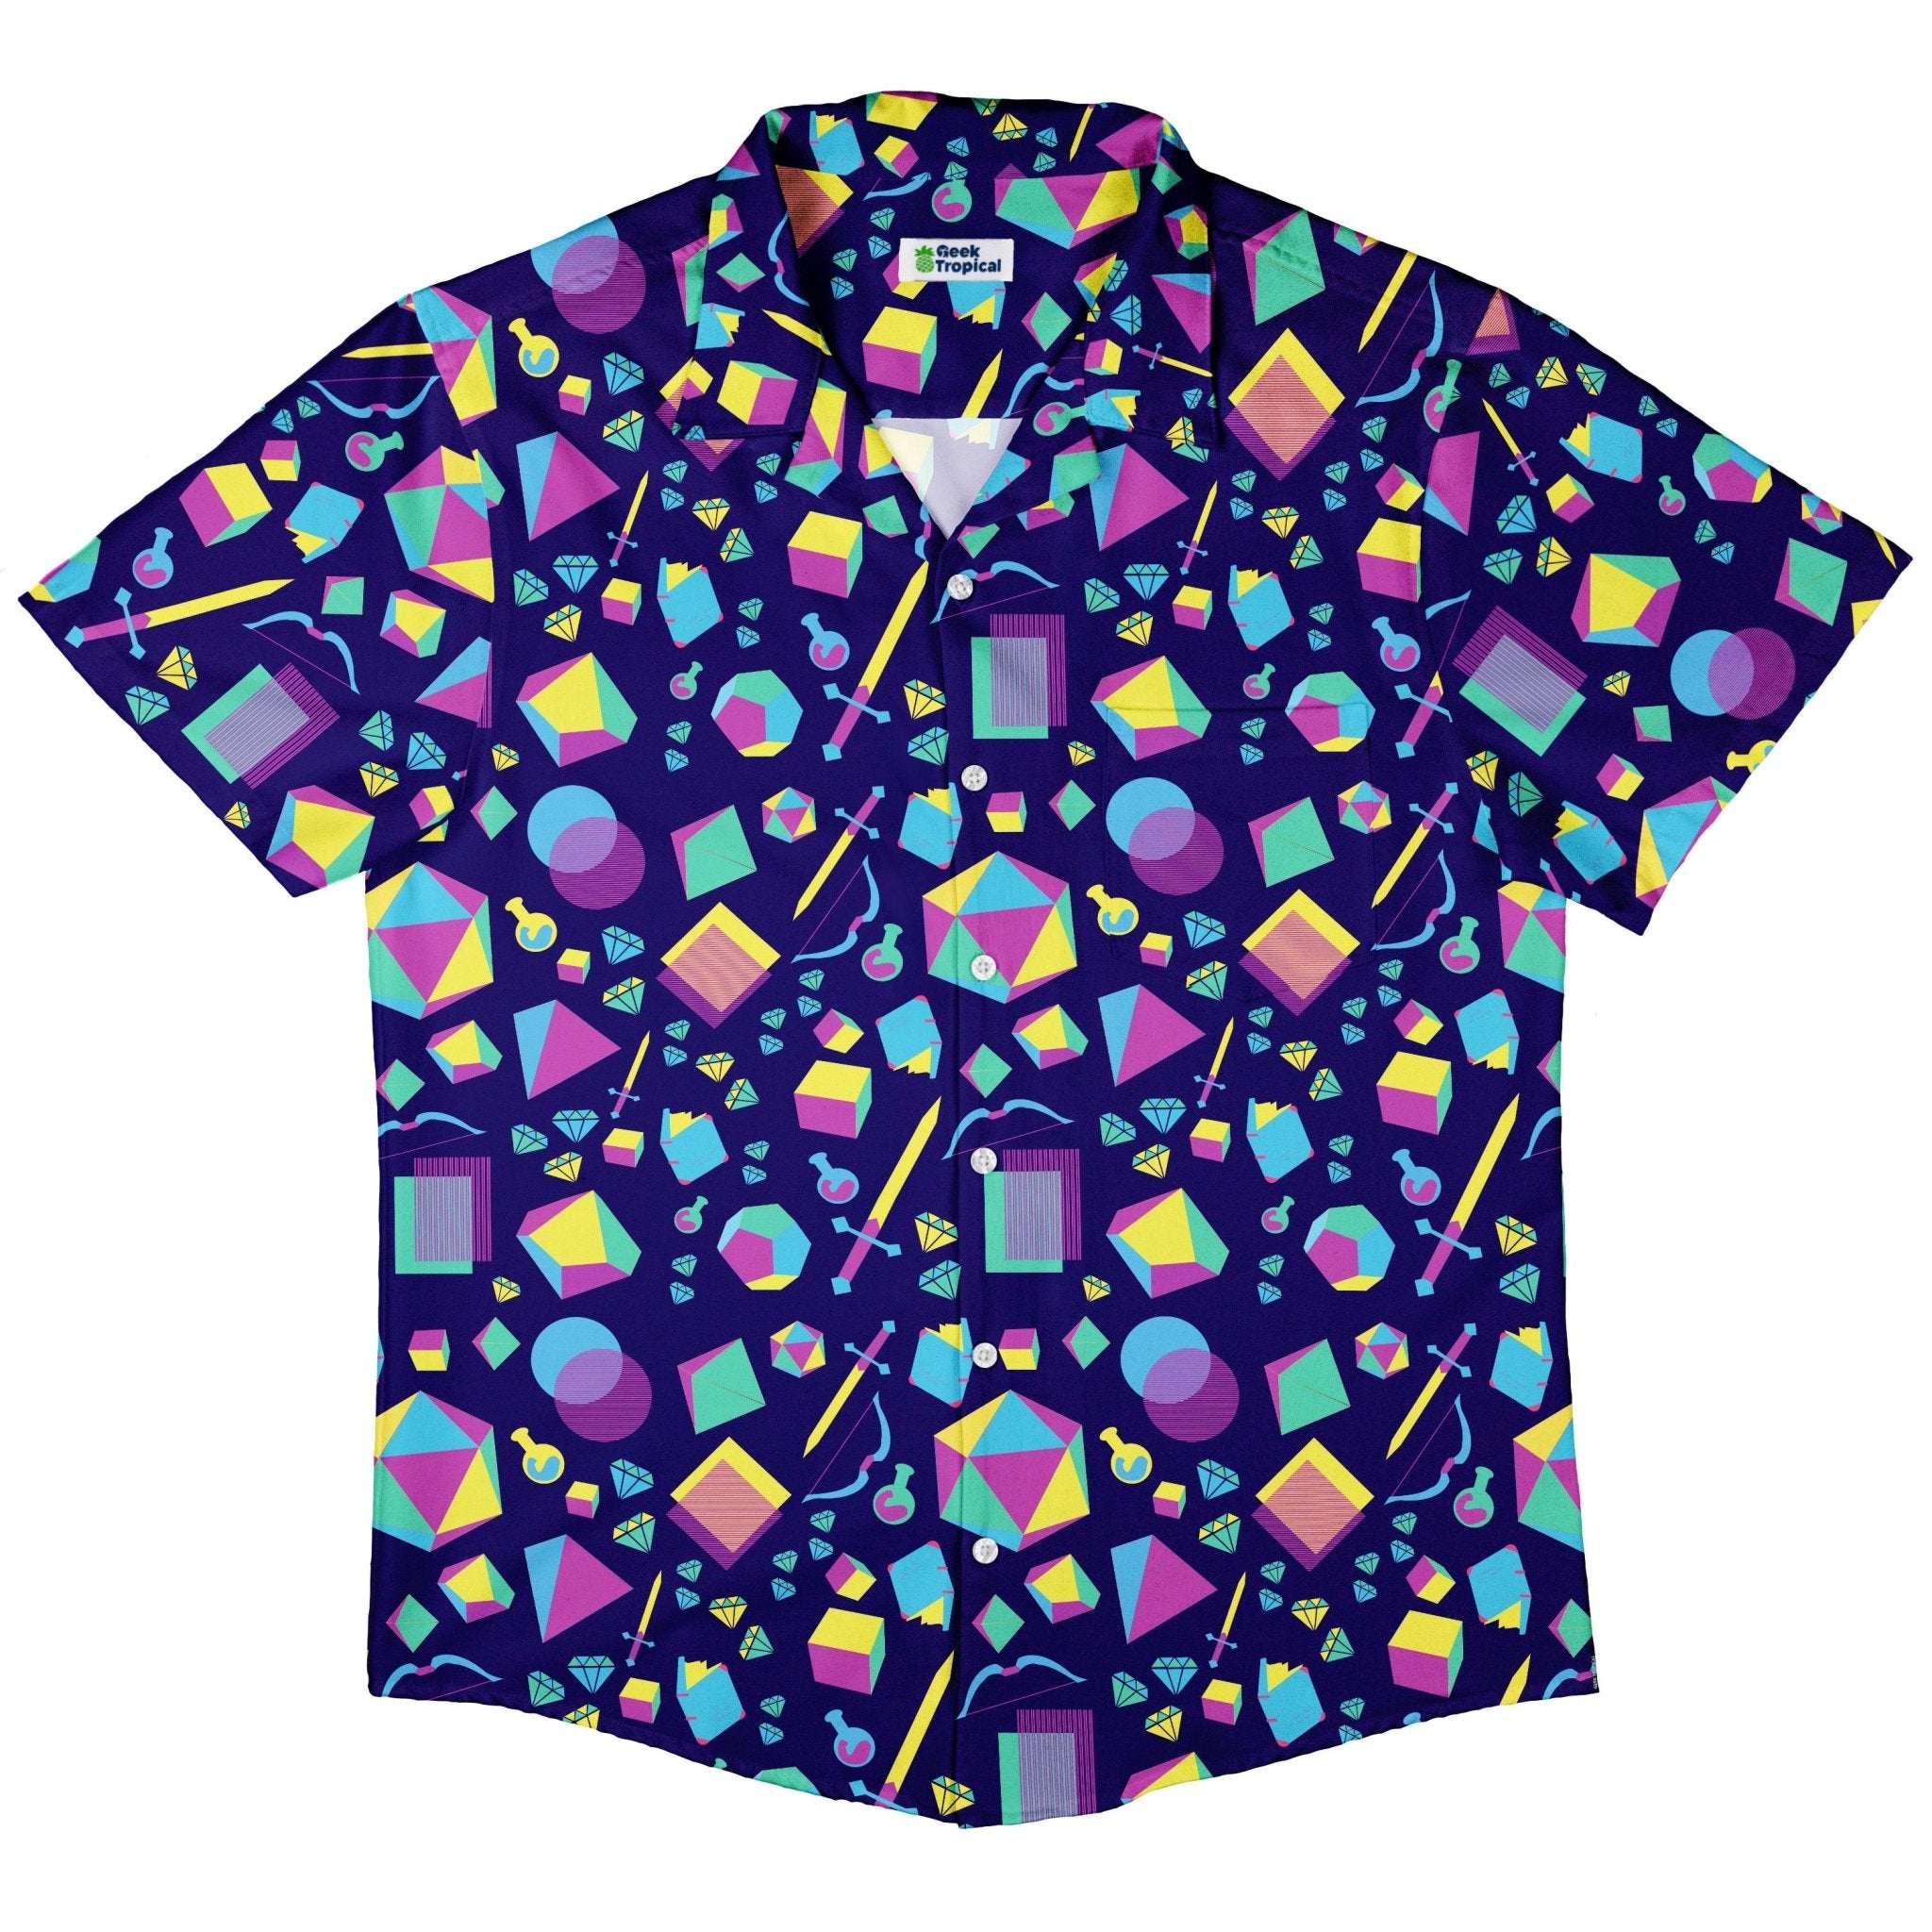 Tabletop RPG Weapons Items Purple Blue Dnd Button Up Shirt - adult sizing - dnd & rpg print - Maximalist Patterns